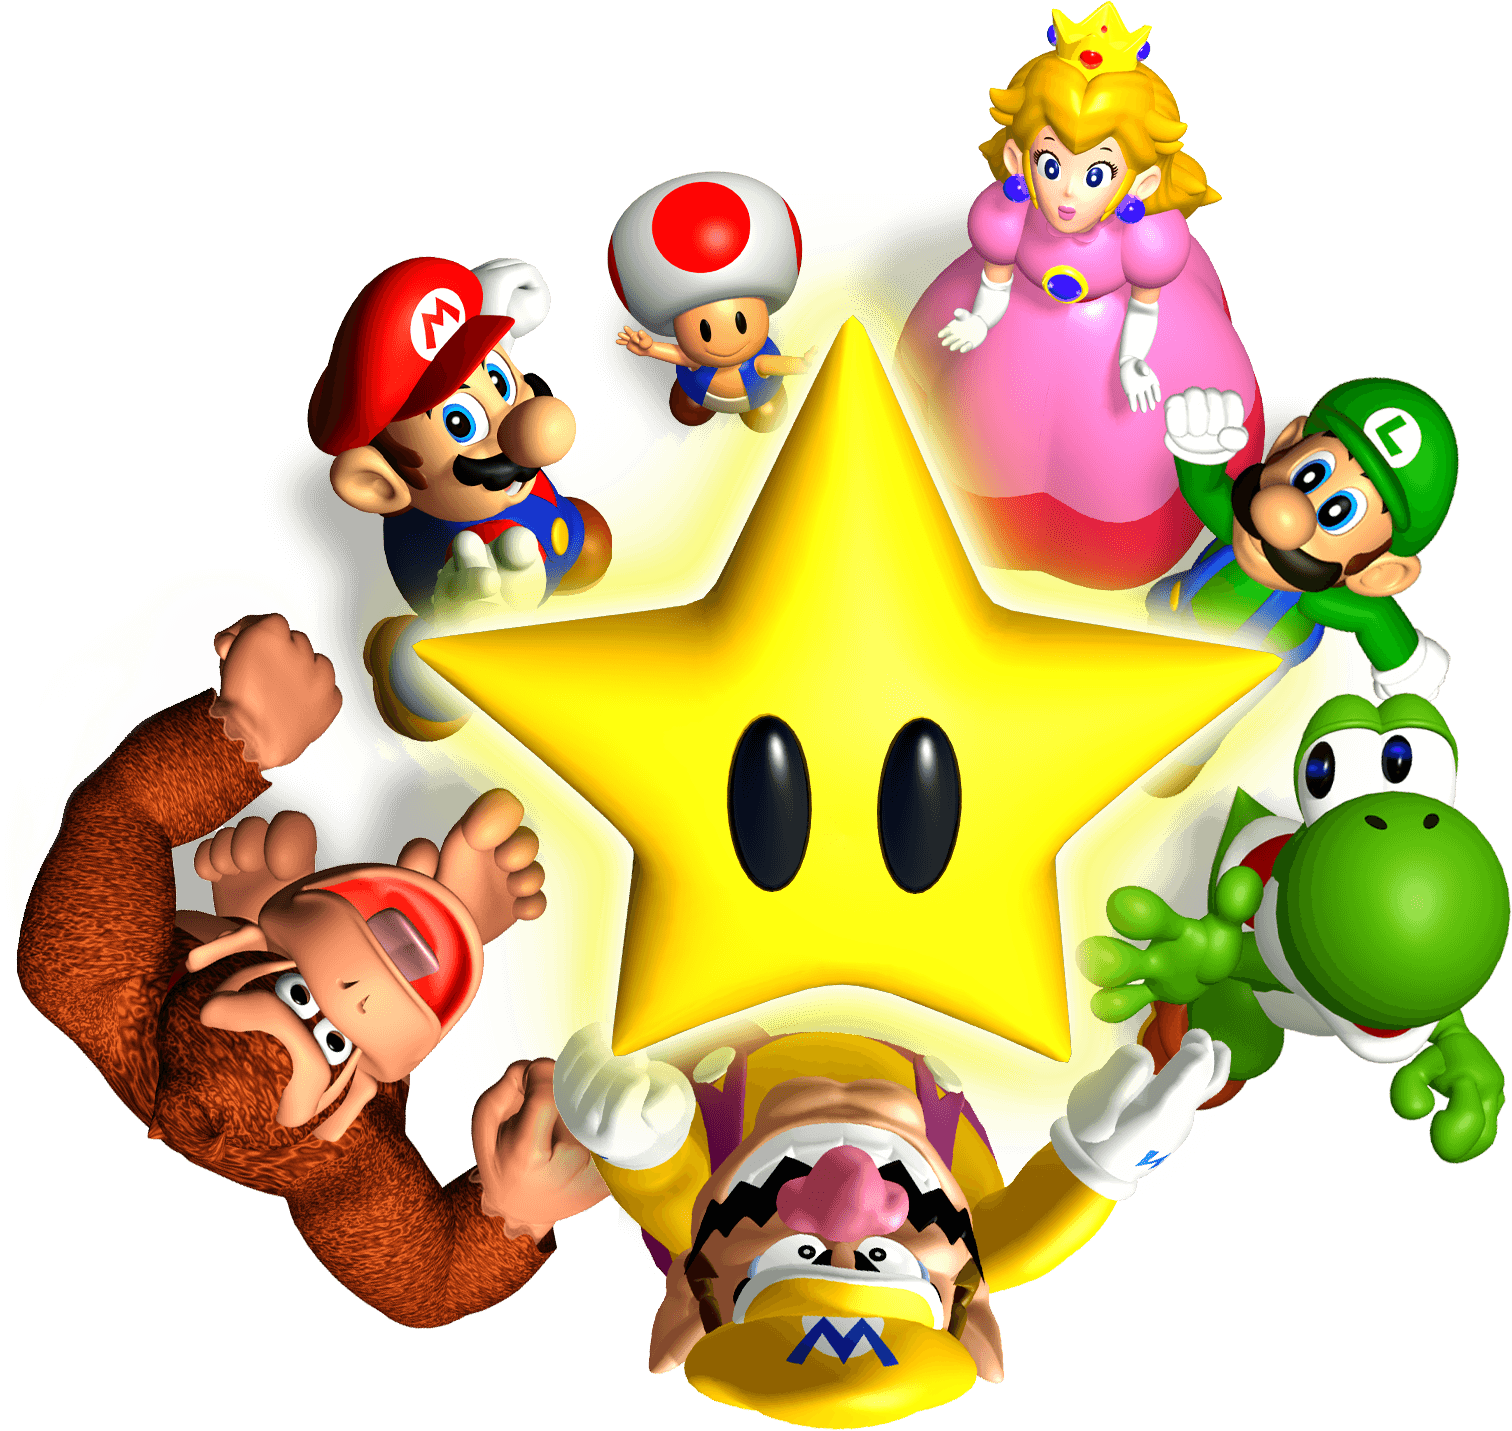 super mario 64 online character voices